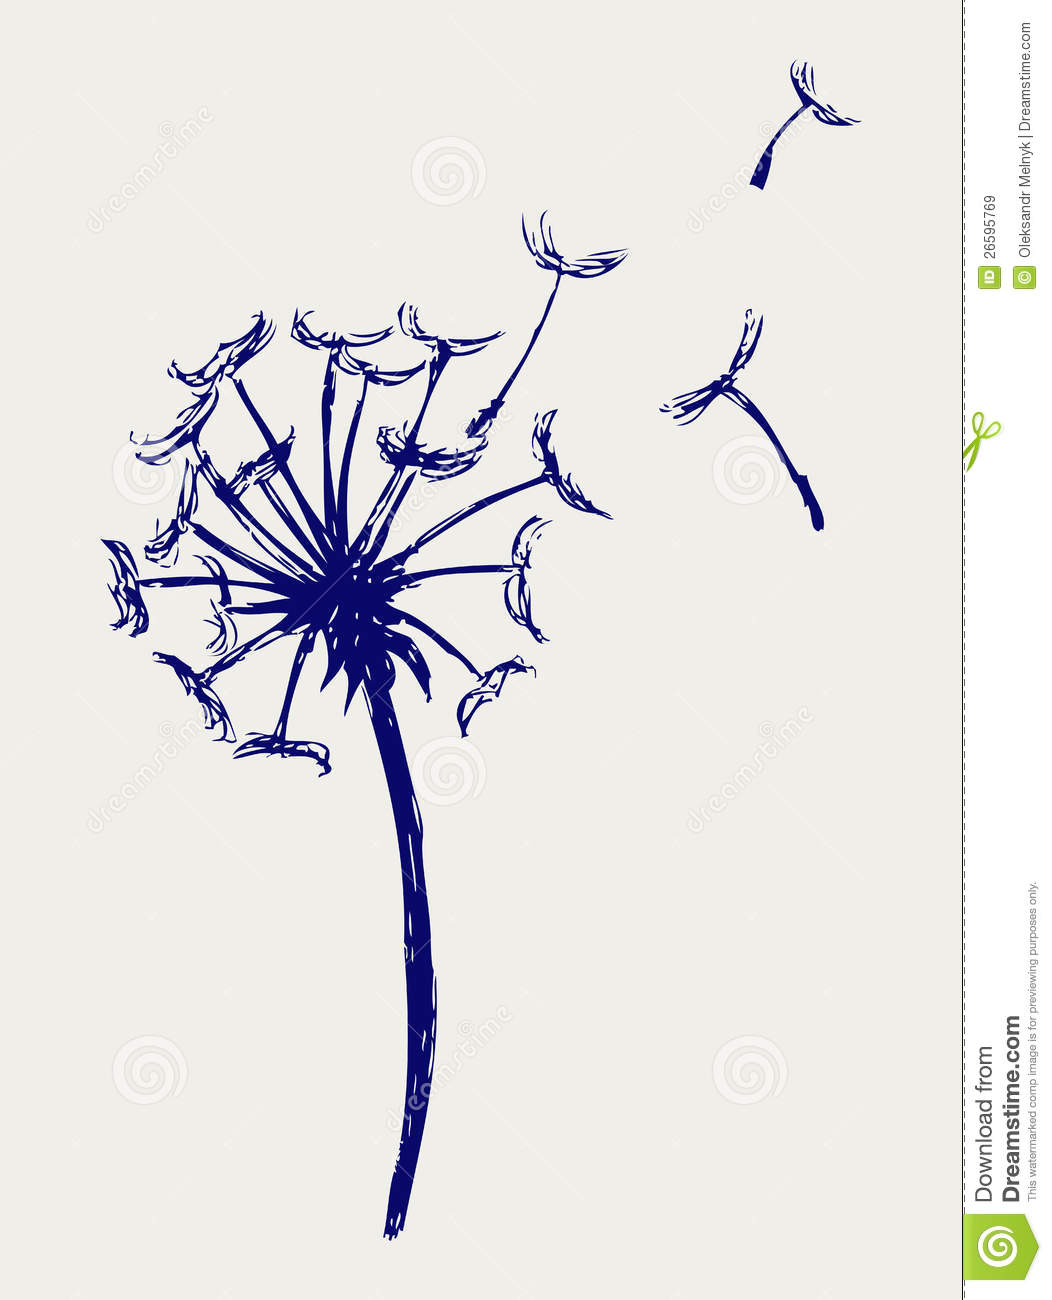 Blow Dandelion Royalty Free Stock Images   Image  26595769